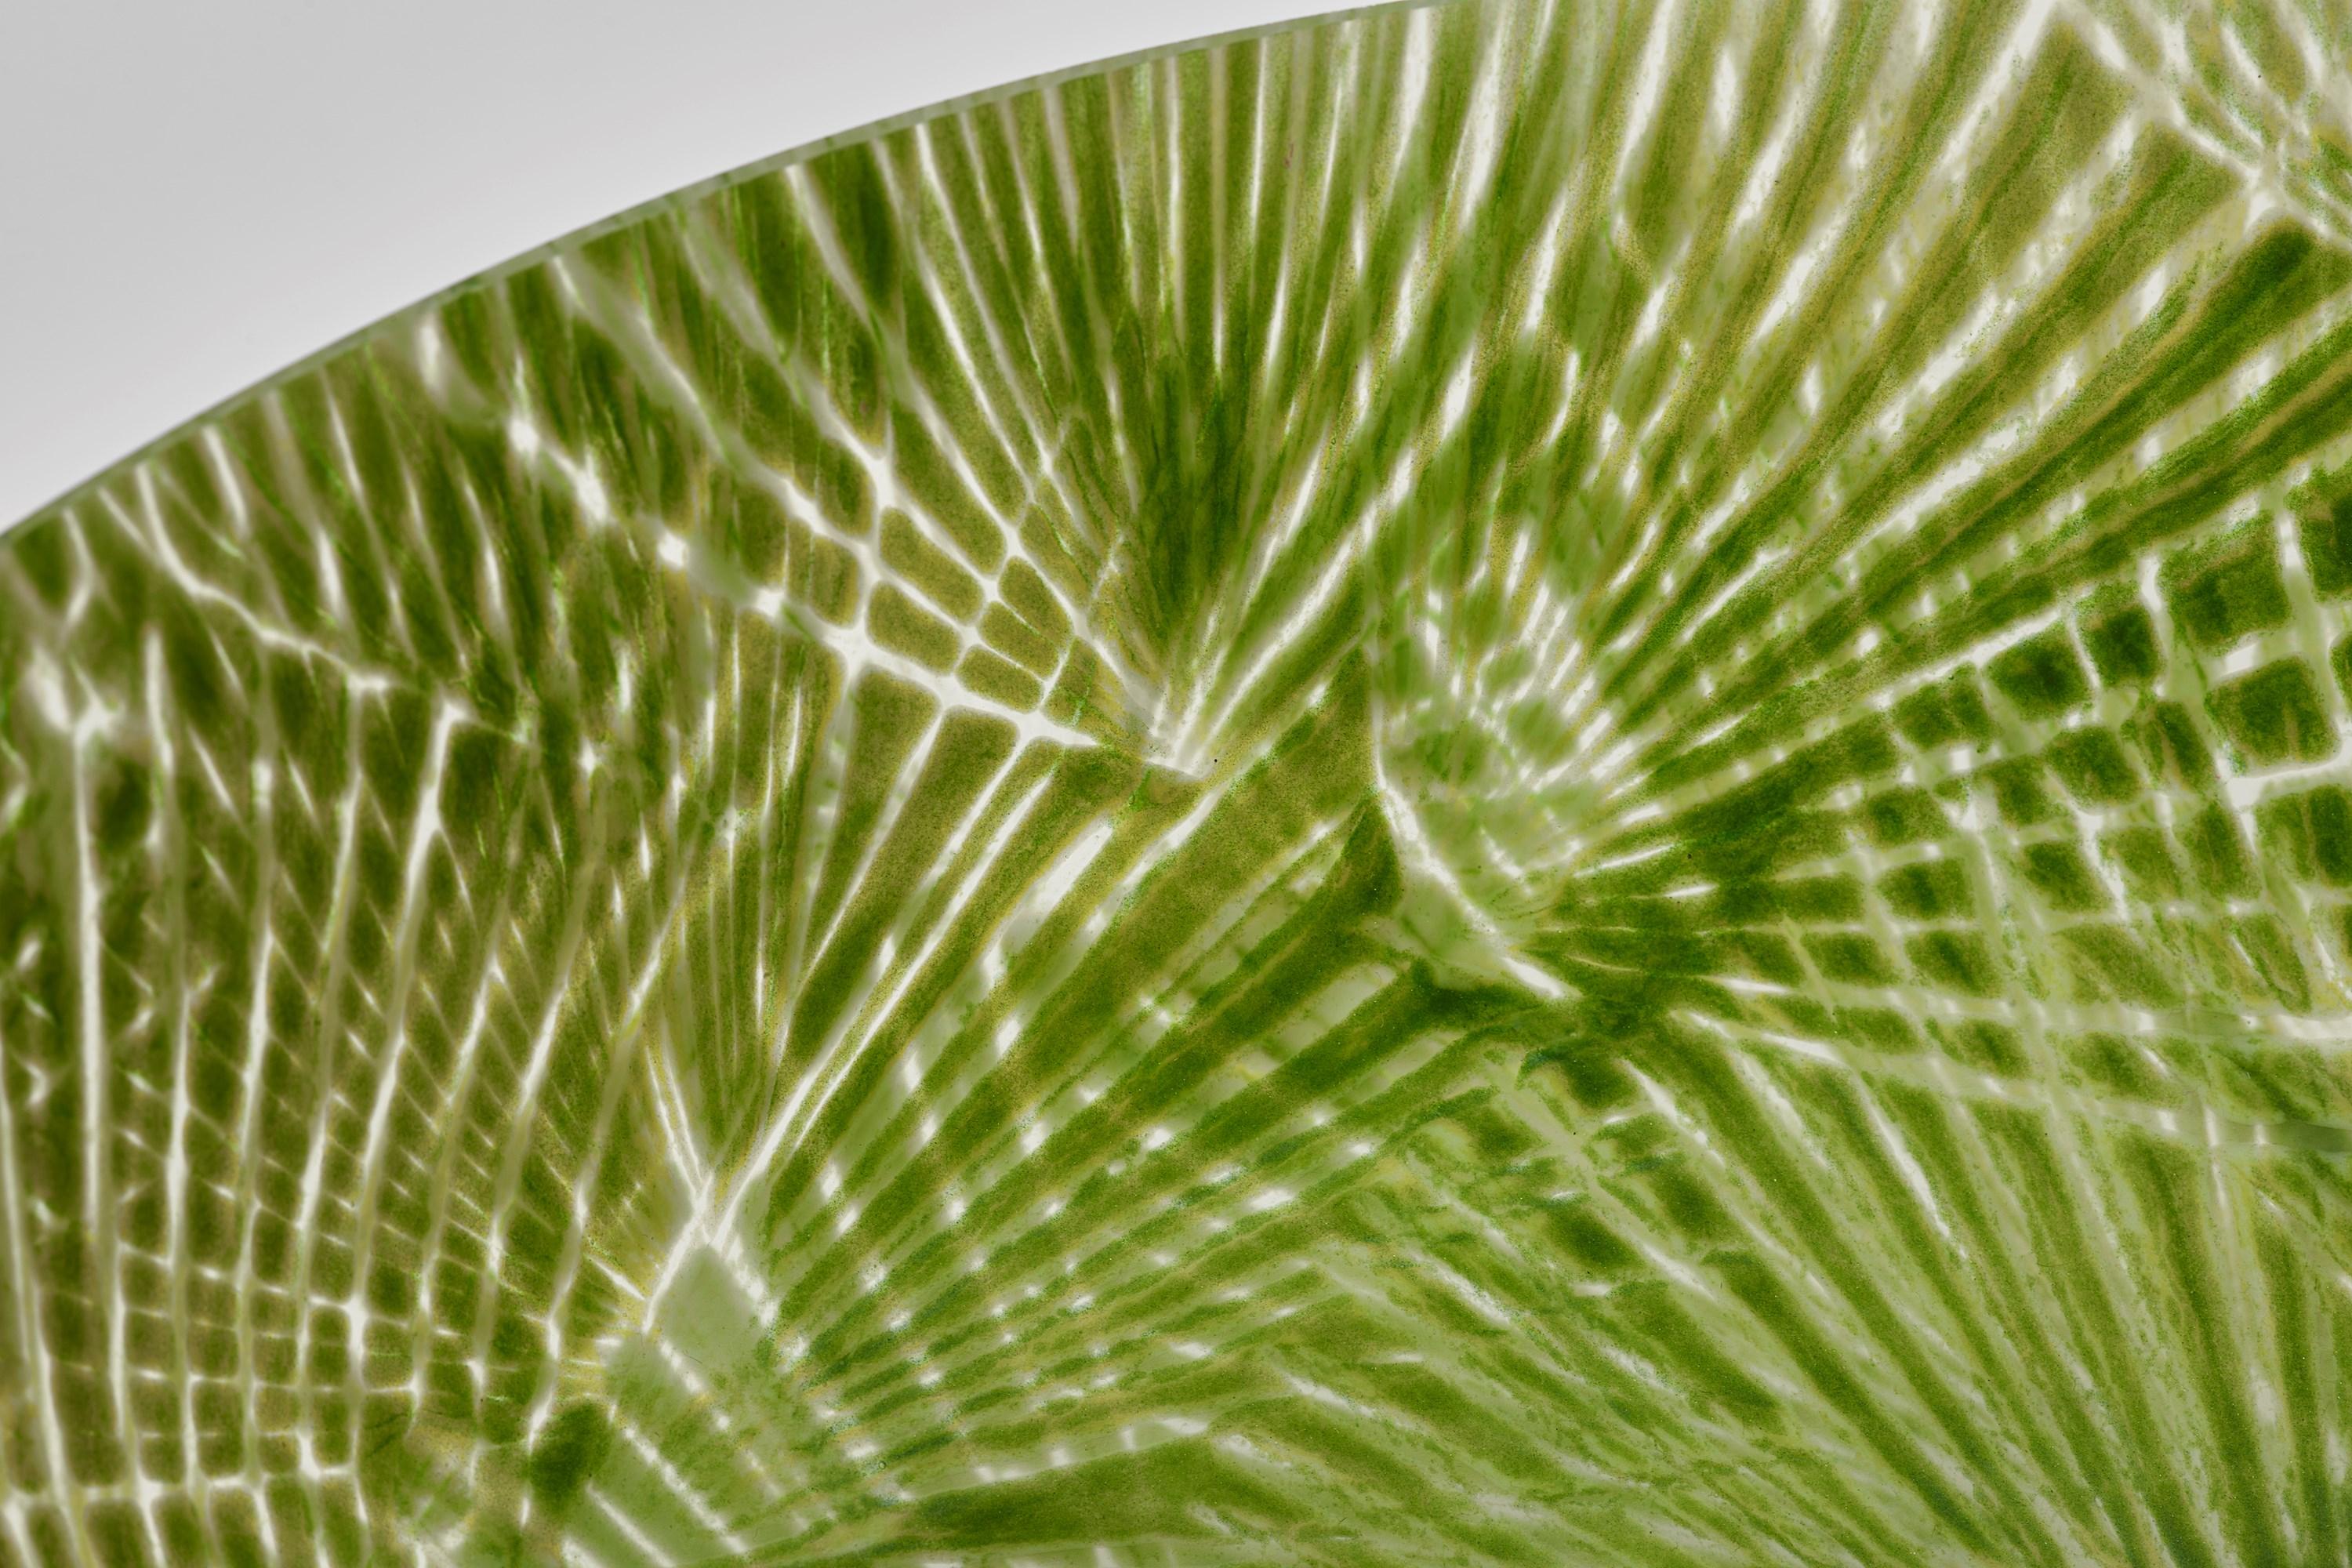 British Taubate, a vibrant green textured glass centrepiece by Amanda Simmons